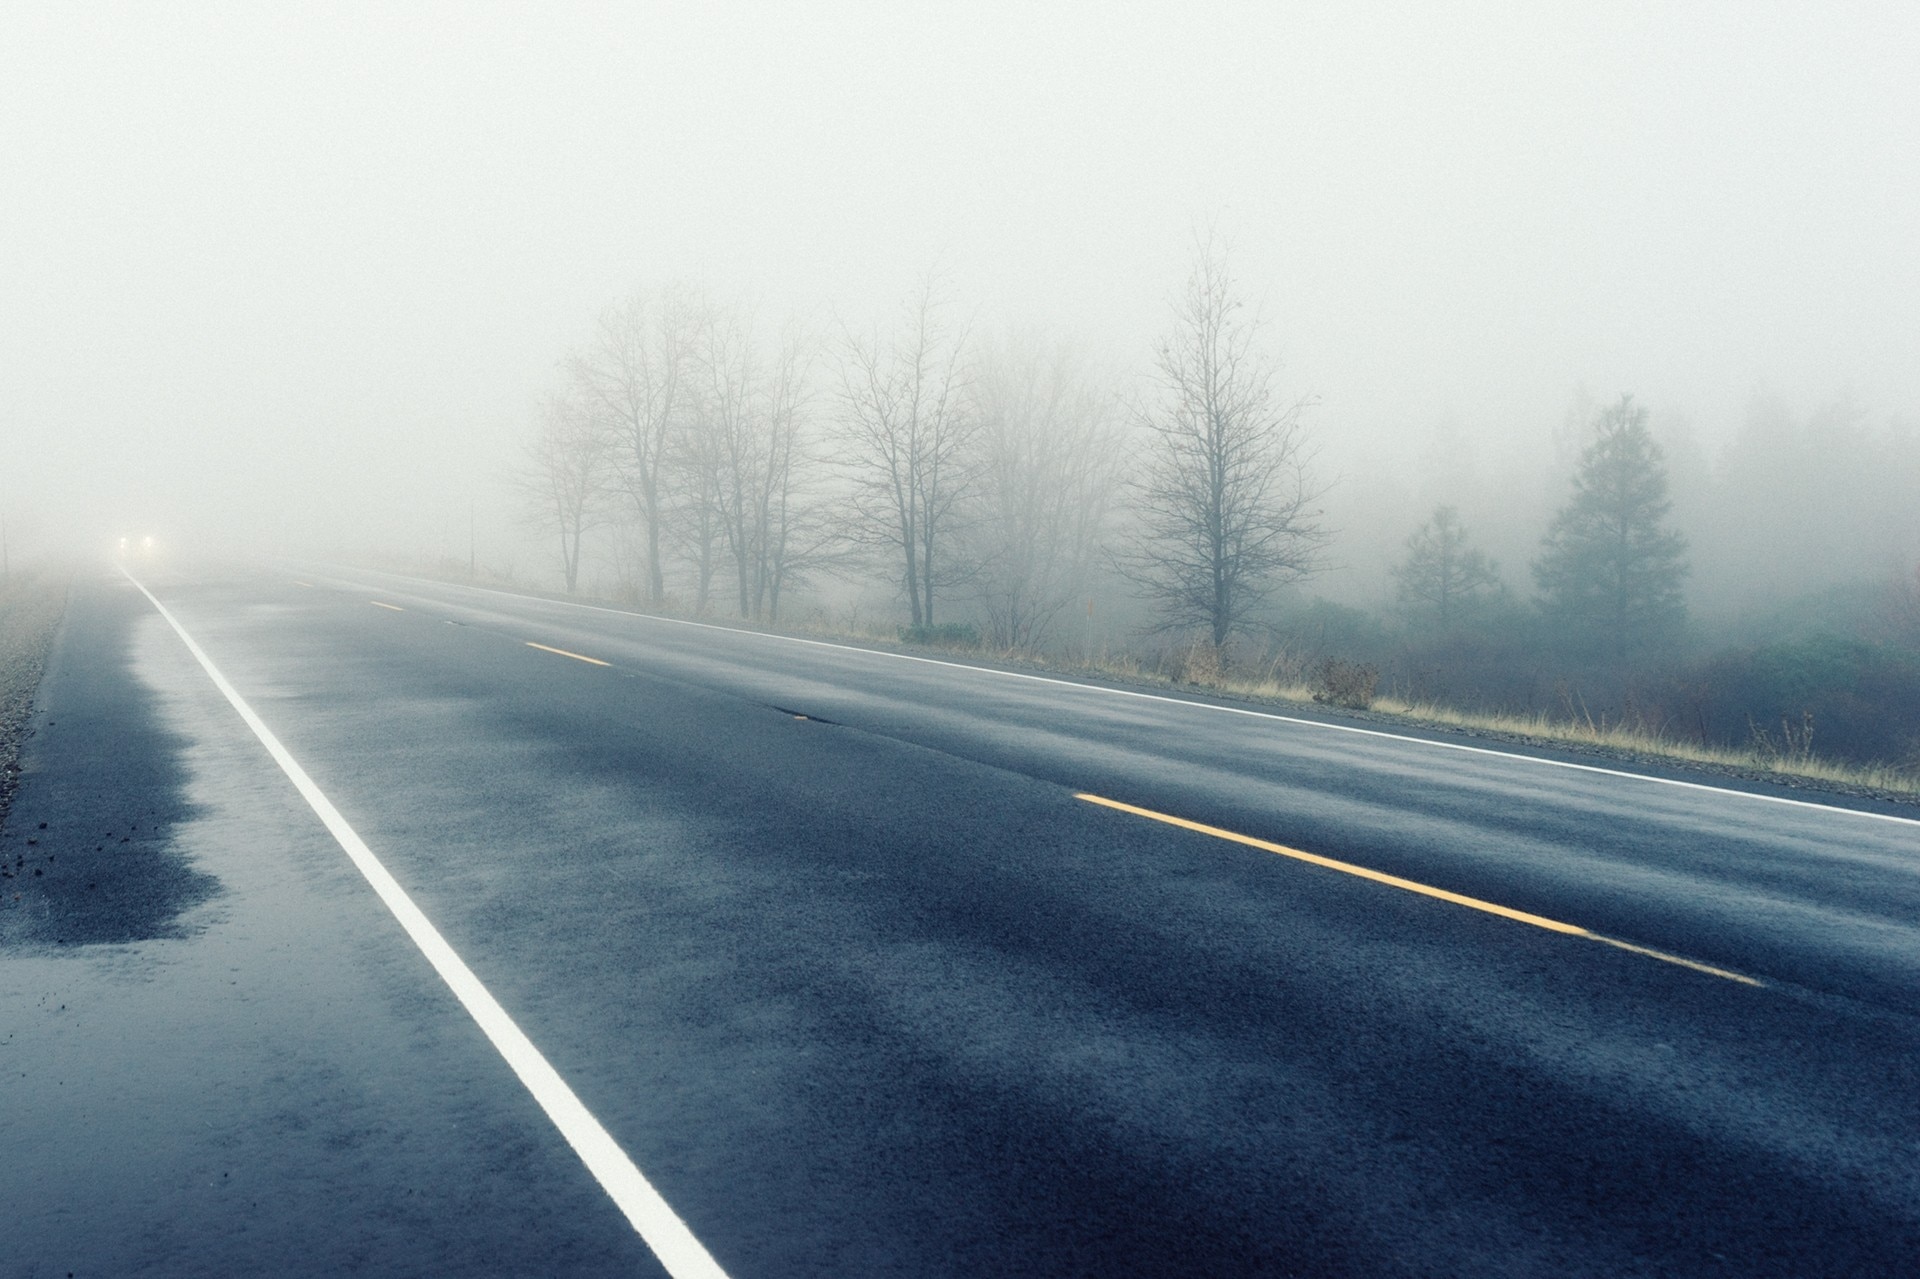 open asphalt road during foggy weather condition at daytime